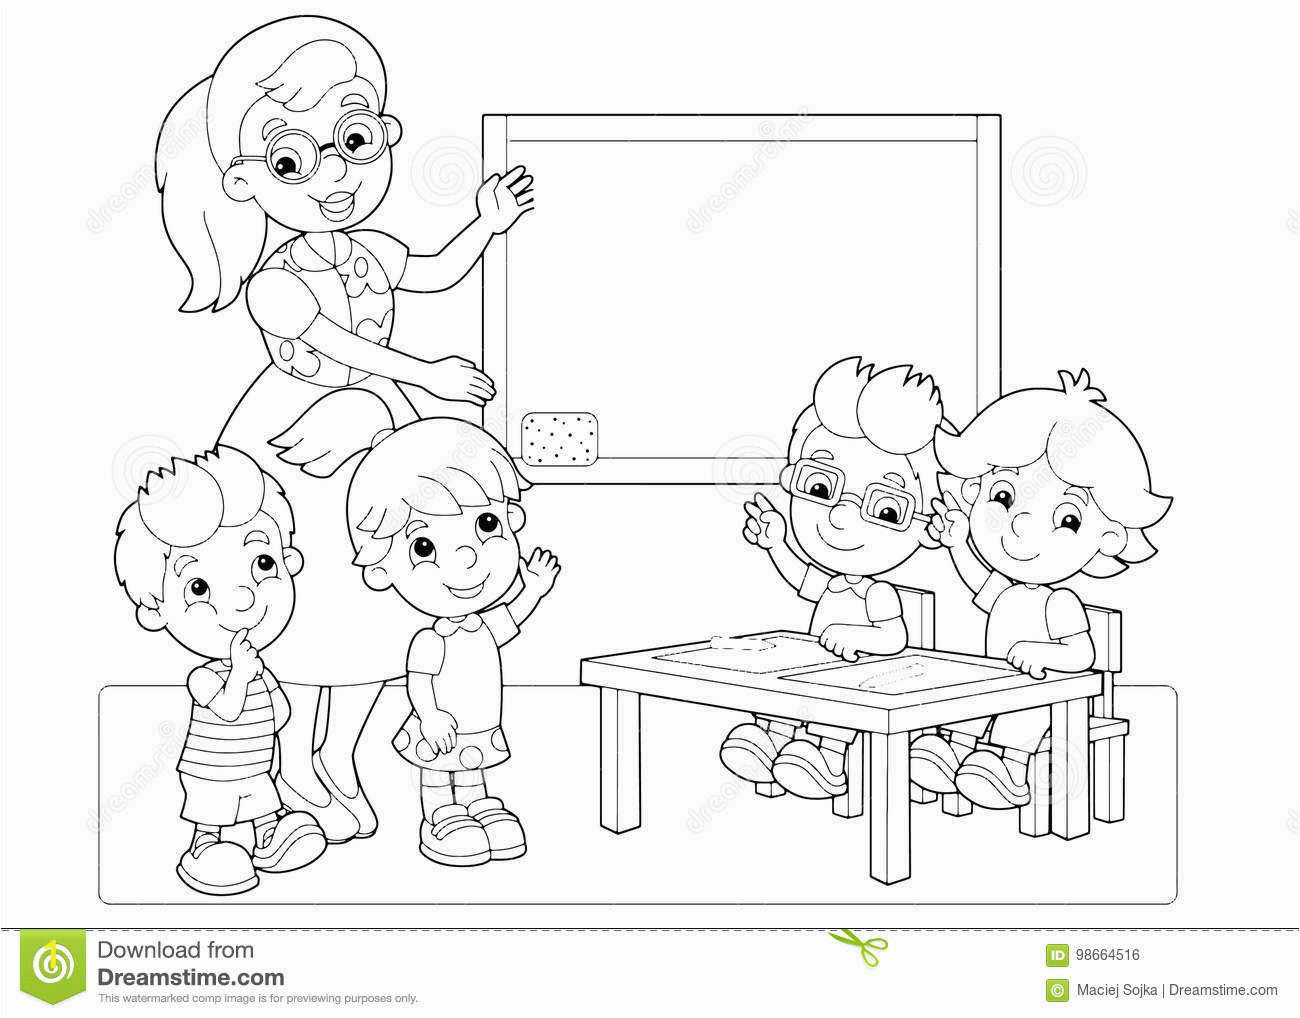 Classroom Coloring Pages for Kids Cartoon Scene with Children and Teacher In the Classroom